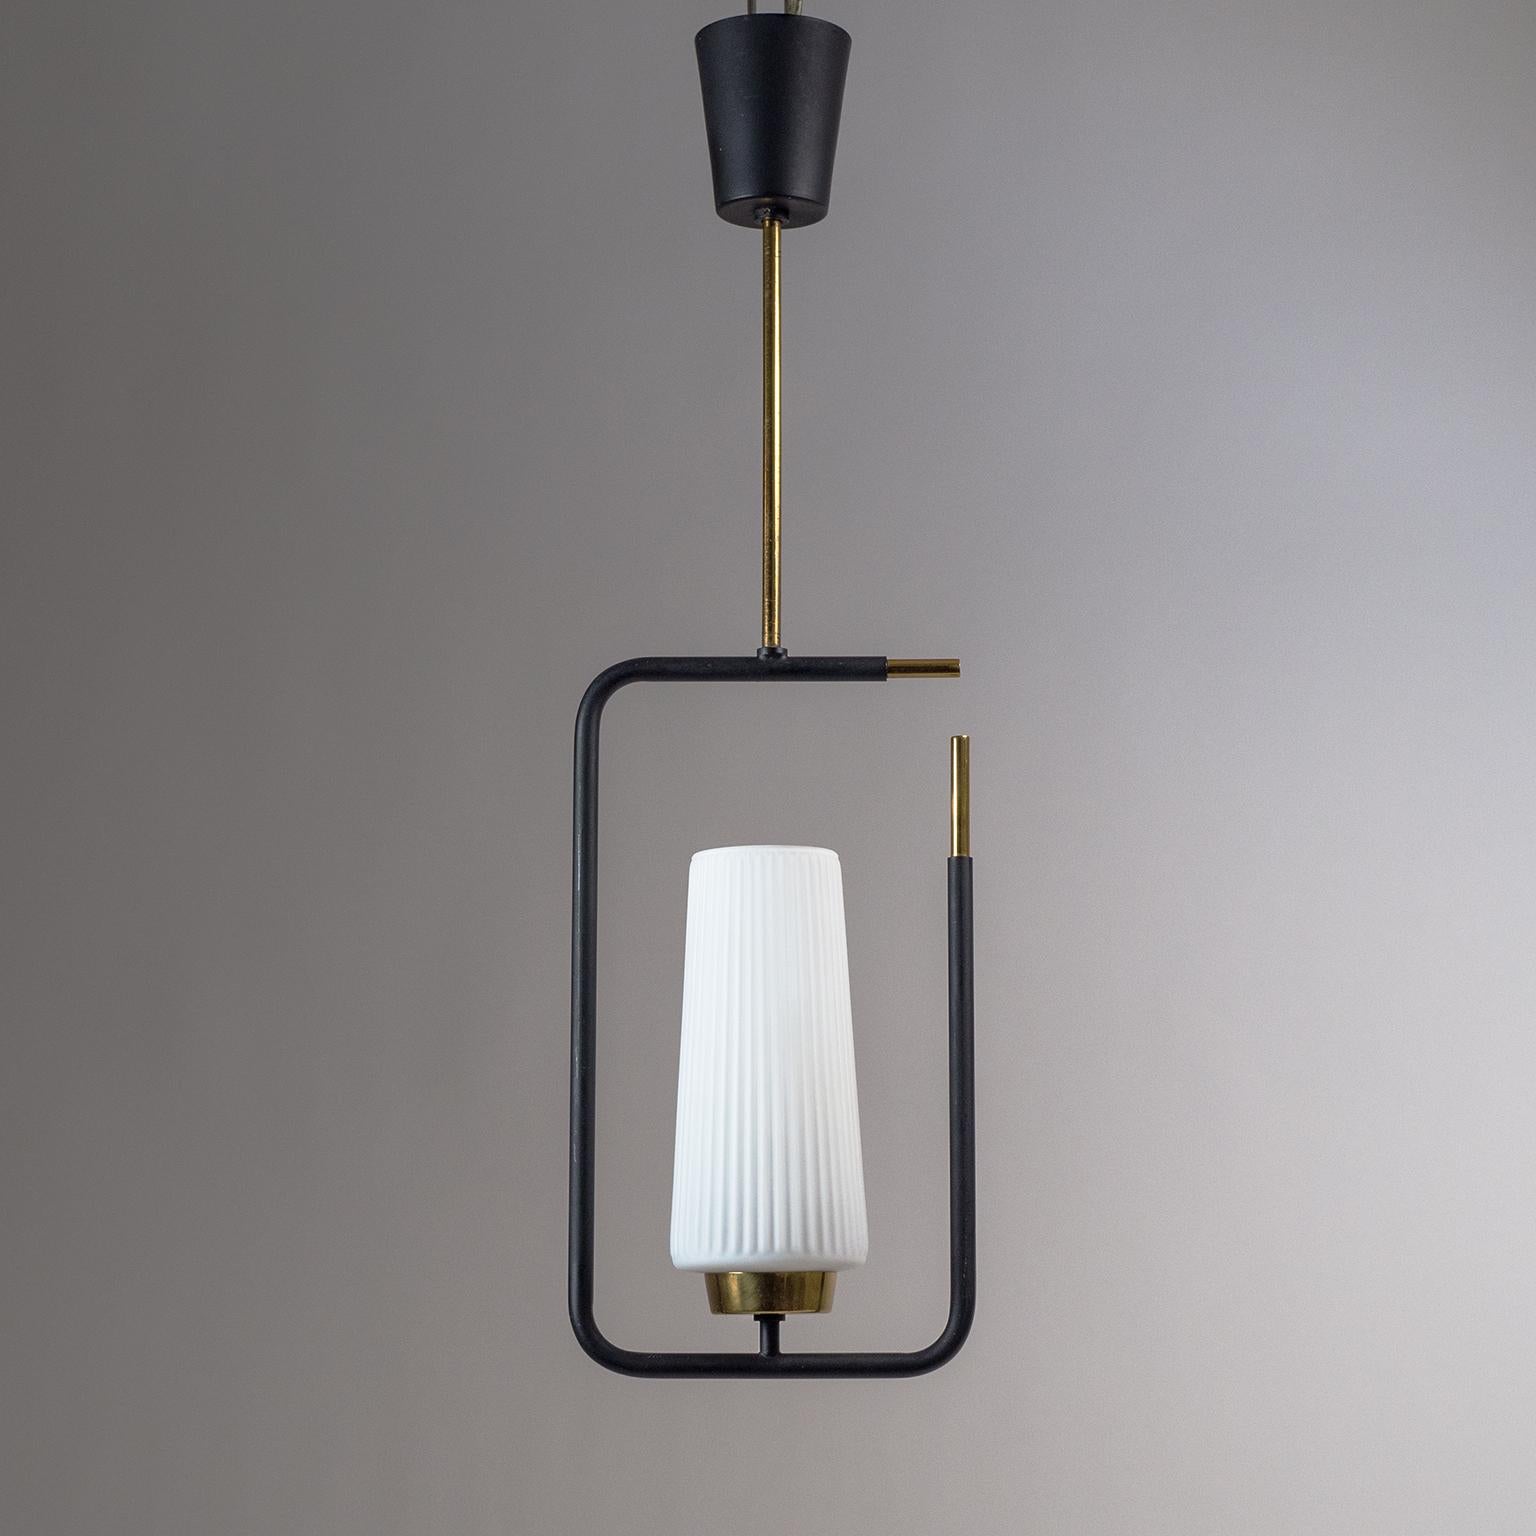 Modernist French pendant from the 1950s. A slightly conical ribbed glass diffuser is framed by a black lacquered structure with brass details. The glass diffuser has a white casing on the inside and a satin finish. One brass and ceramic E14 socket